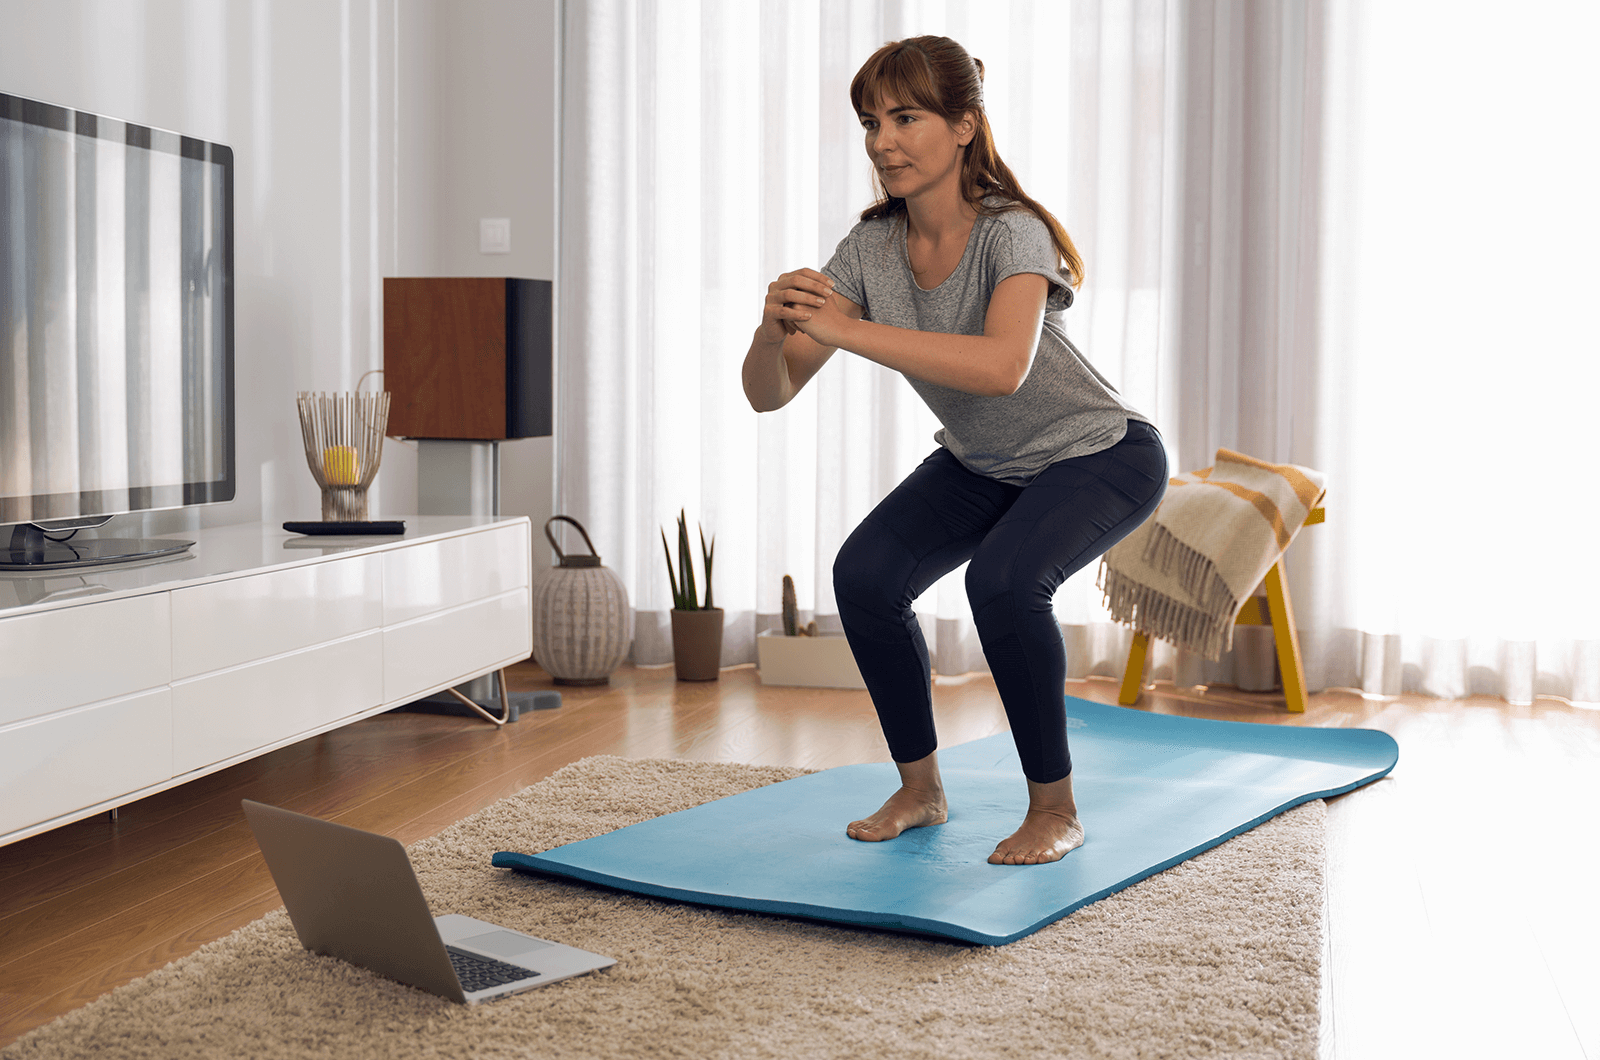 Woman watching laptop while exercising on blue mat in living room